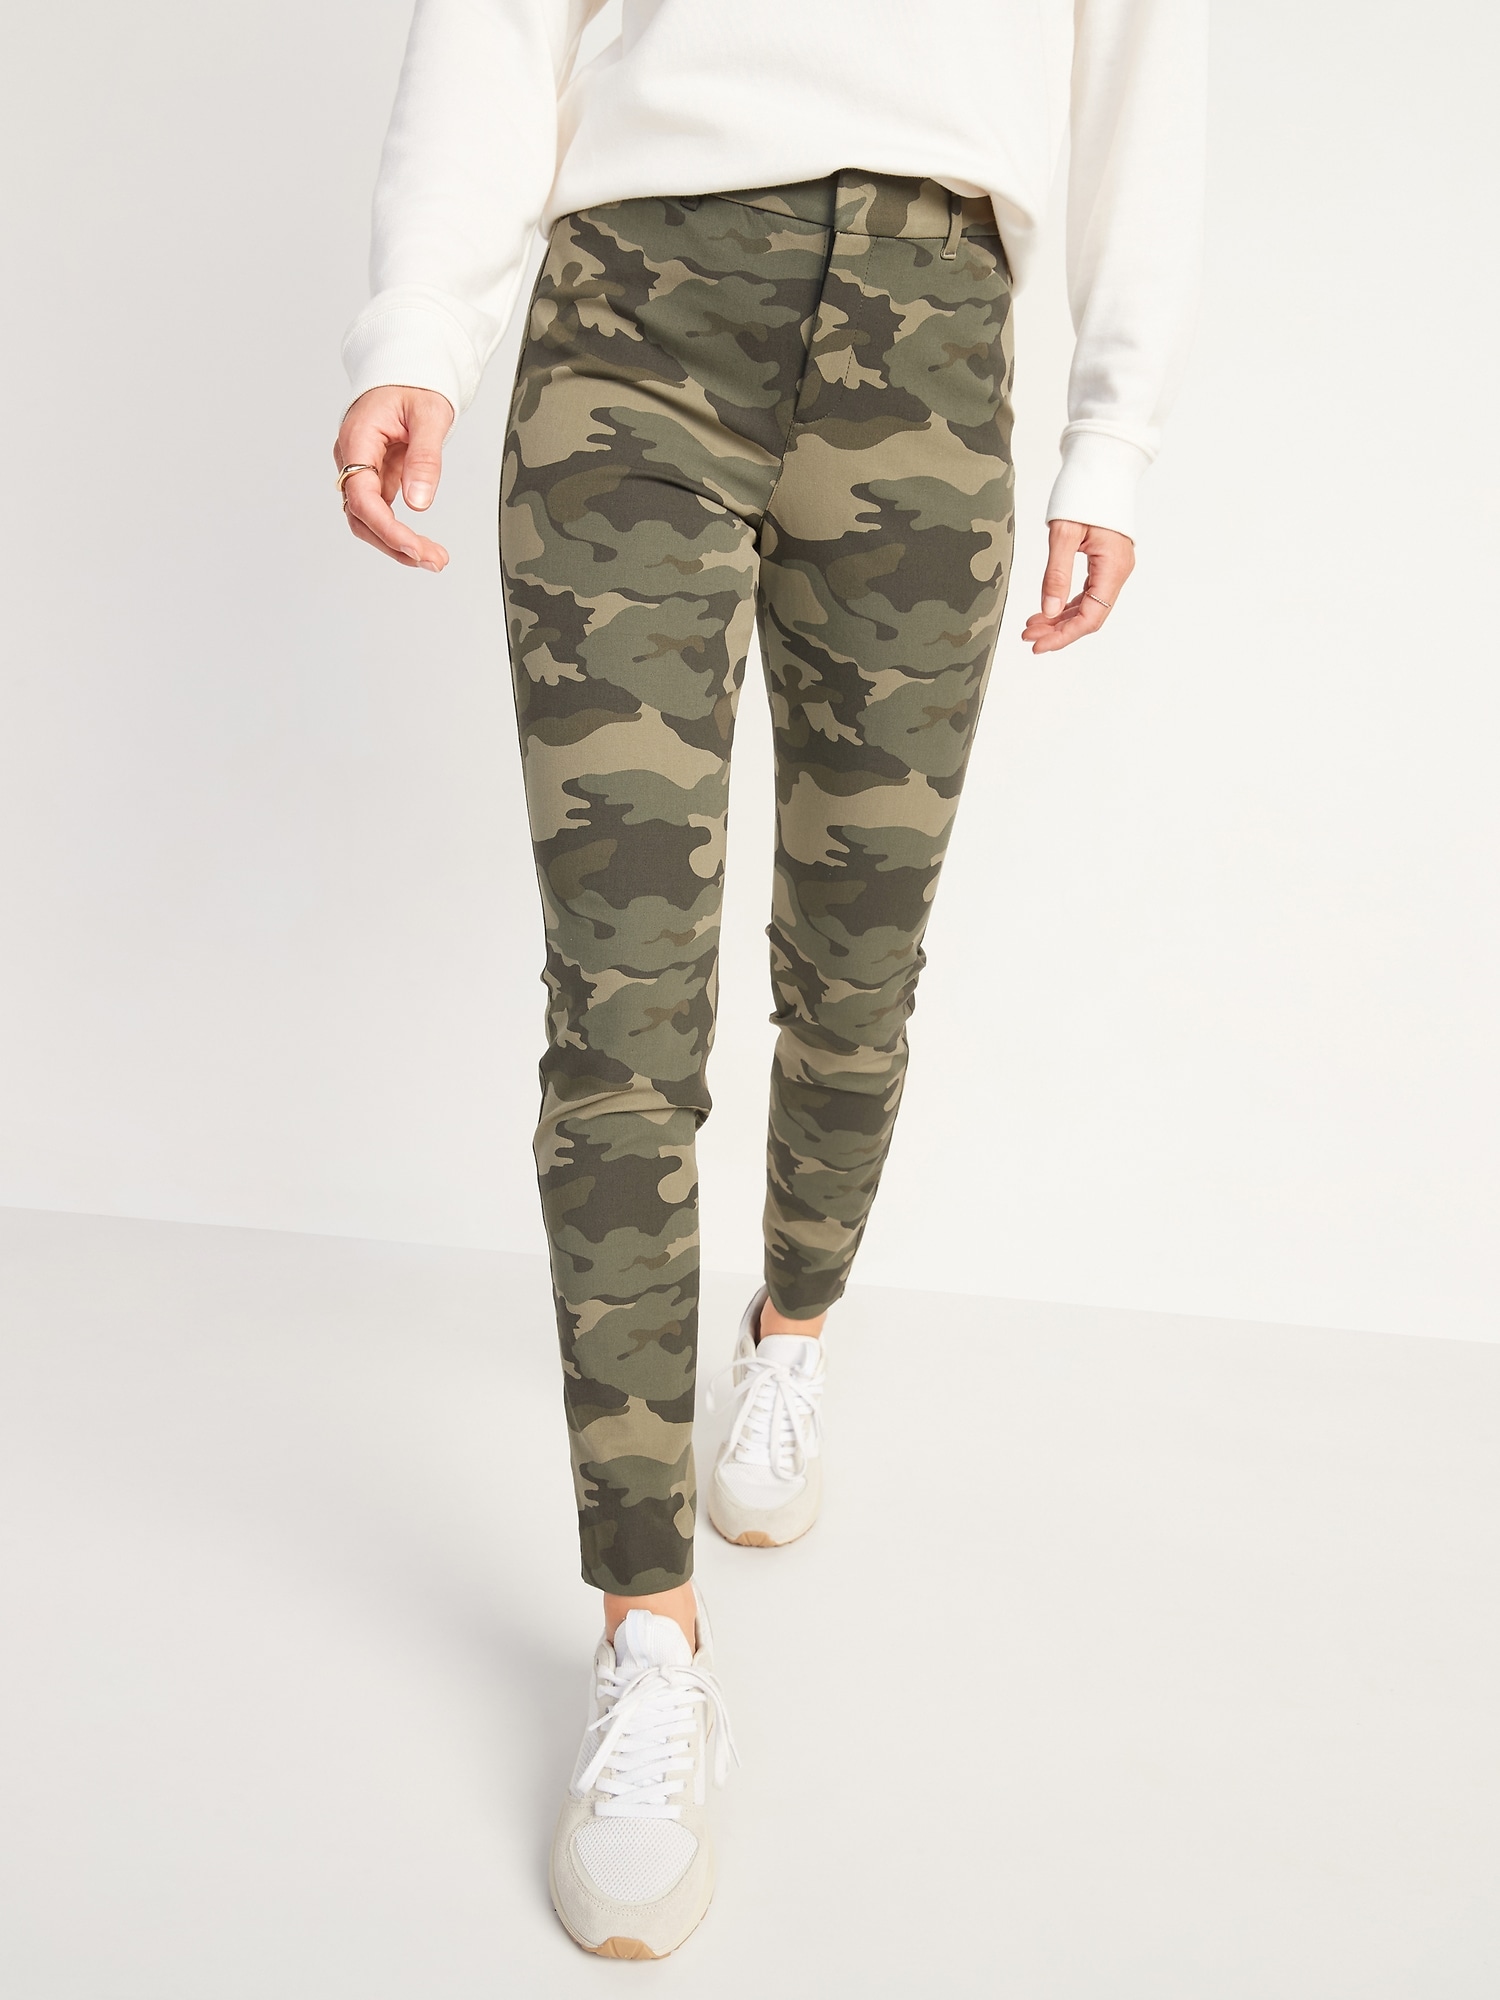 High-Waisted Camo Pixie Full-Length Pants for Women | Old Navy